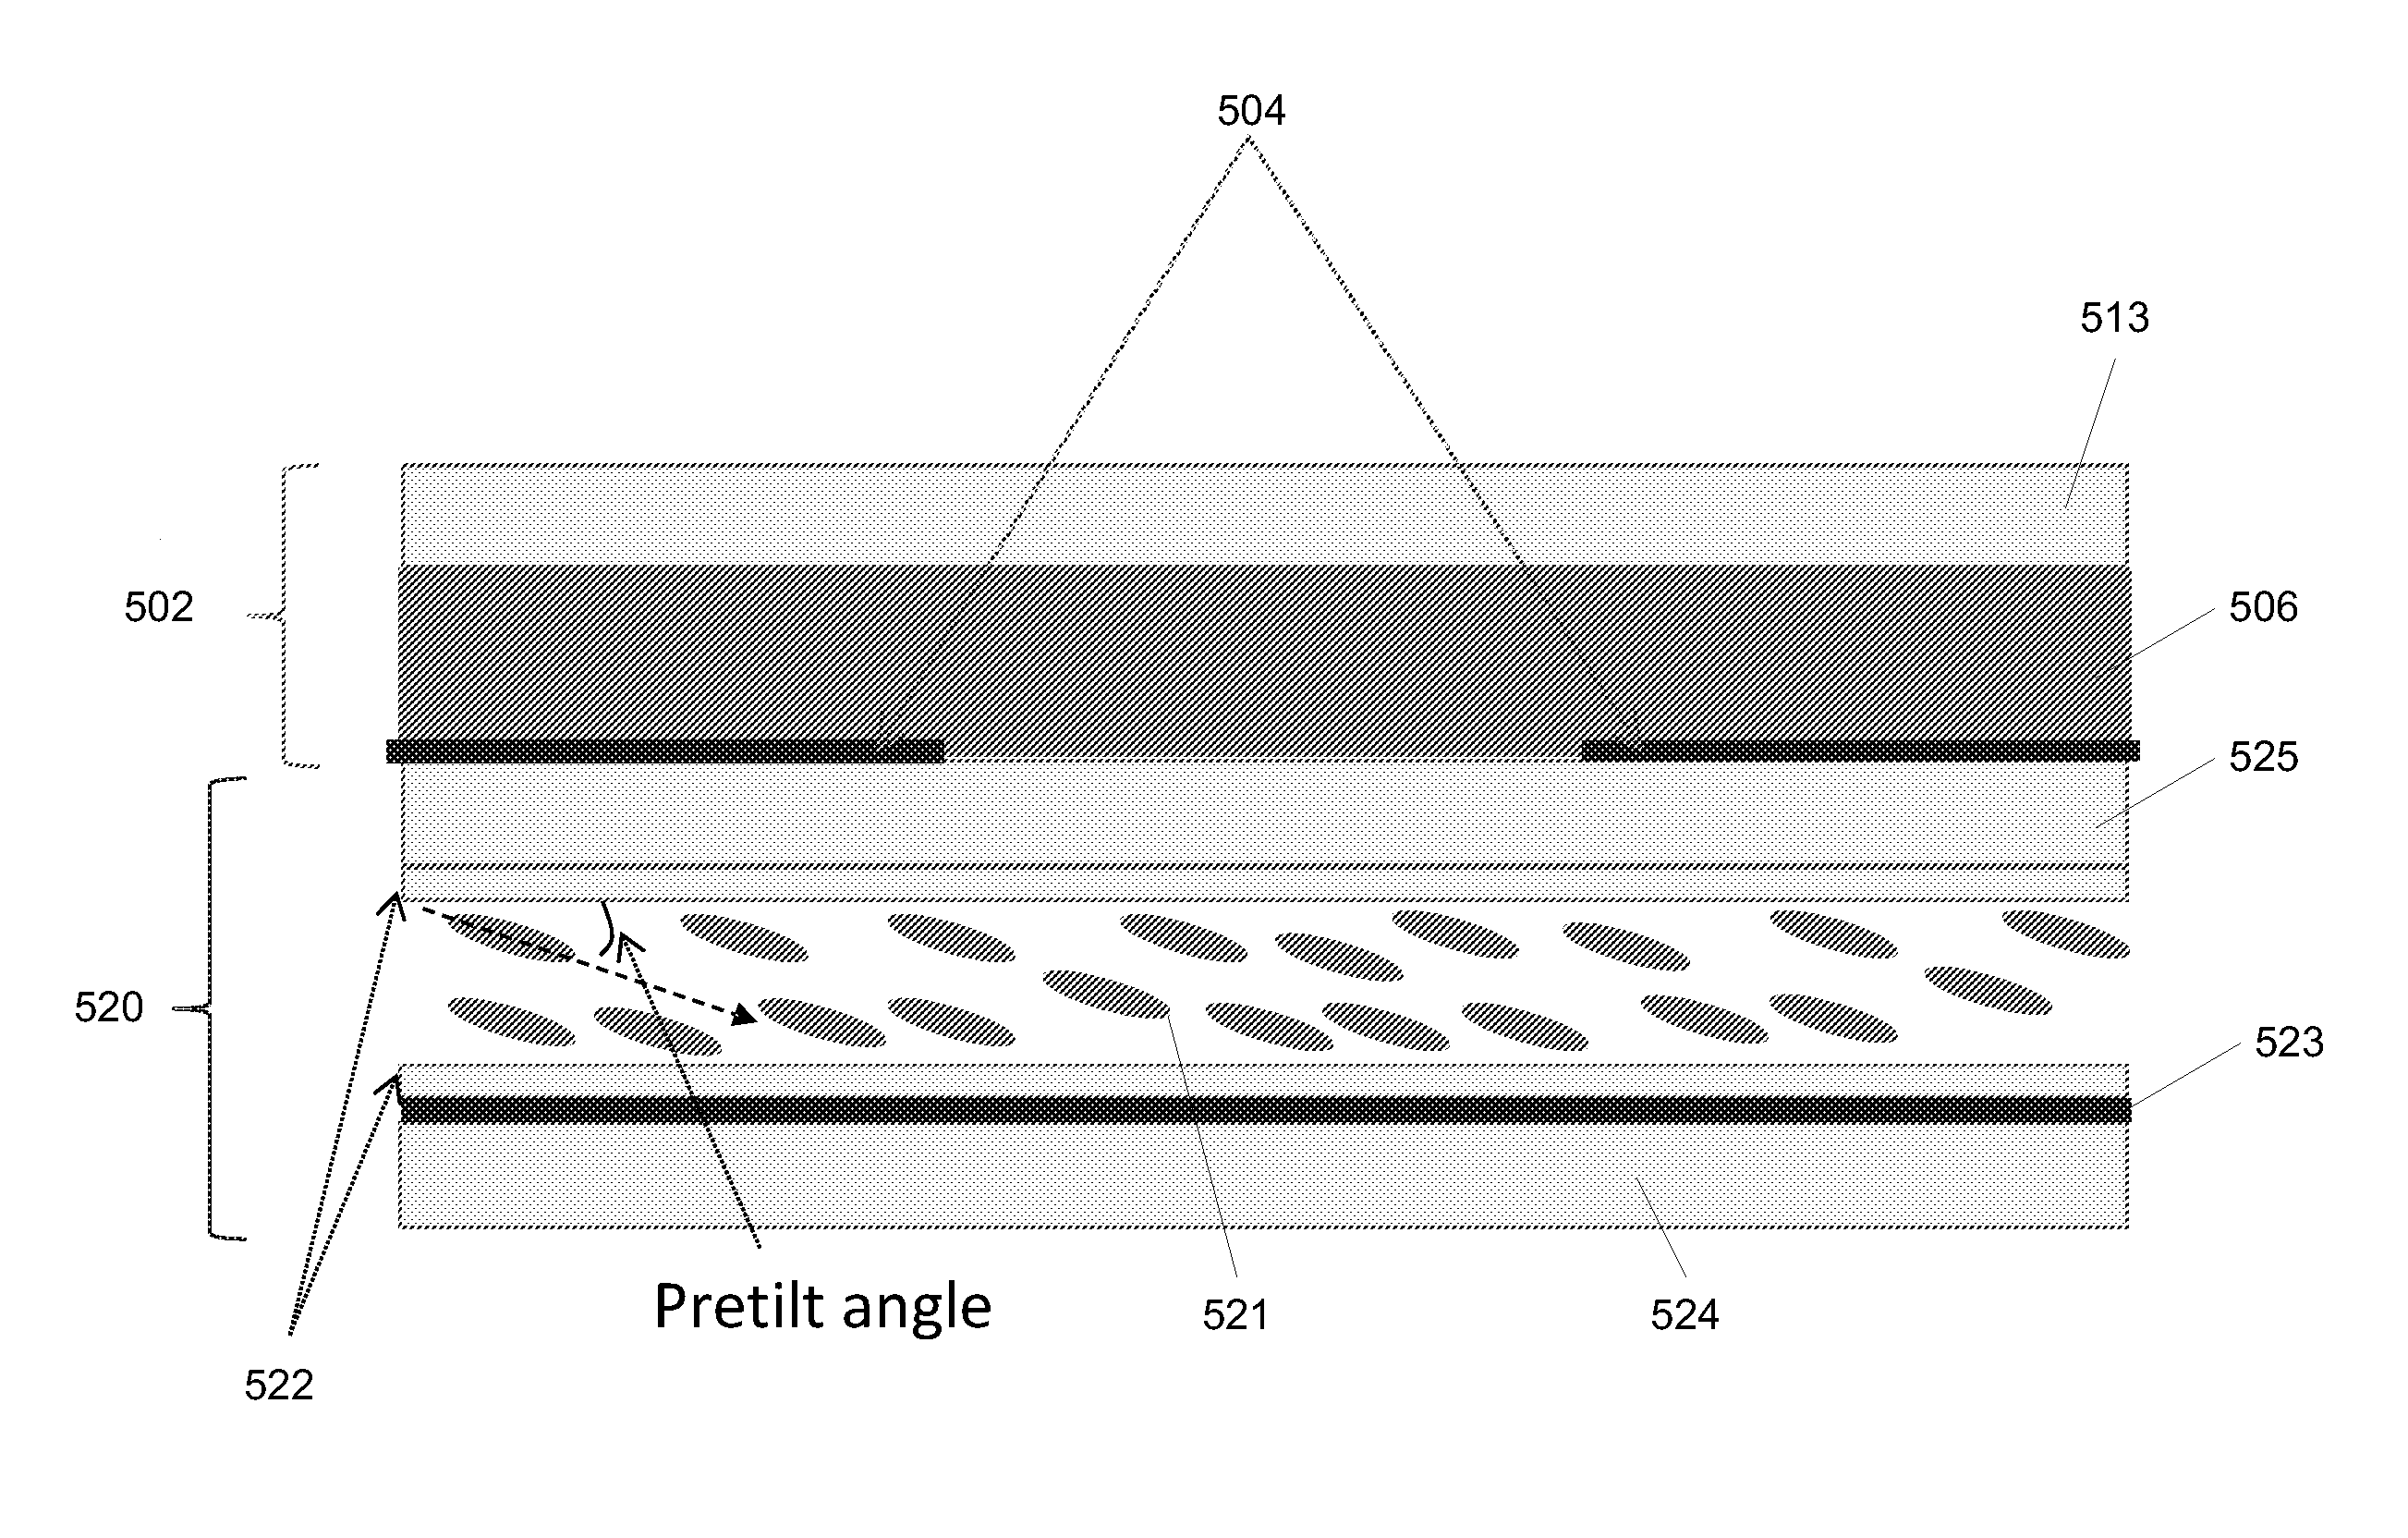 Electro-optical devices using dynamic reconfiguration of effective electrode structures